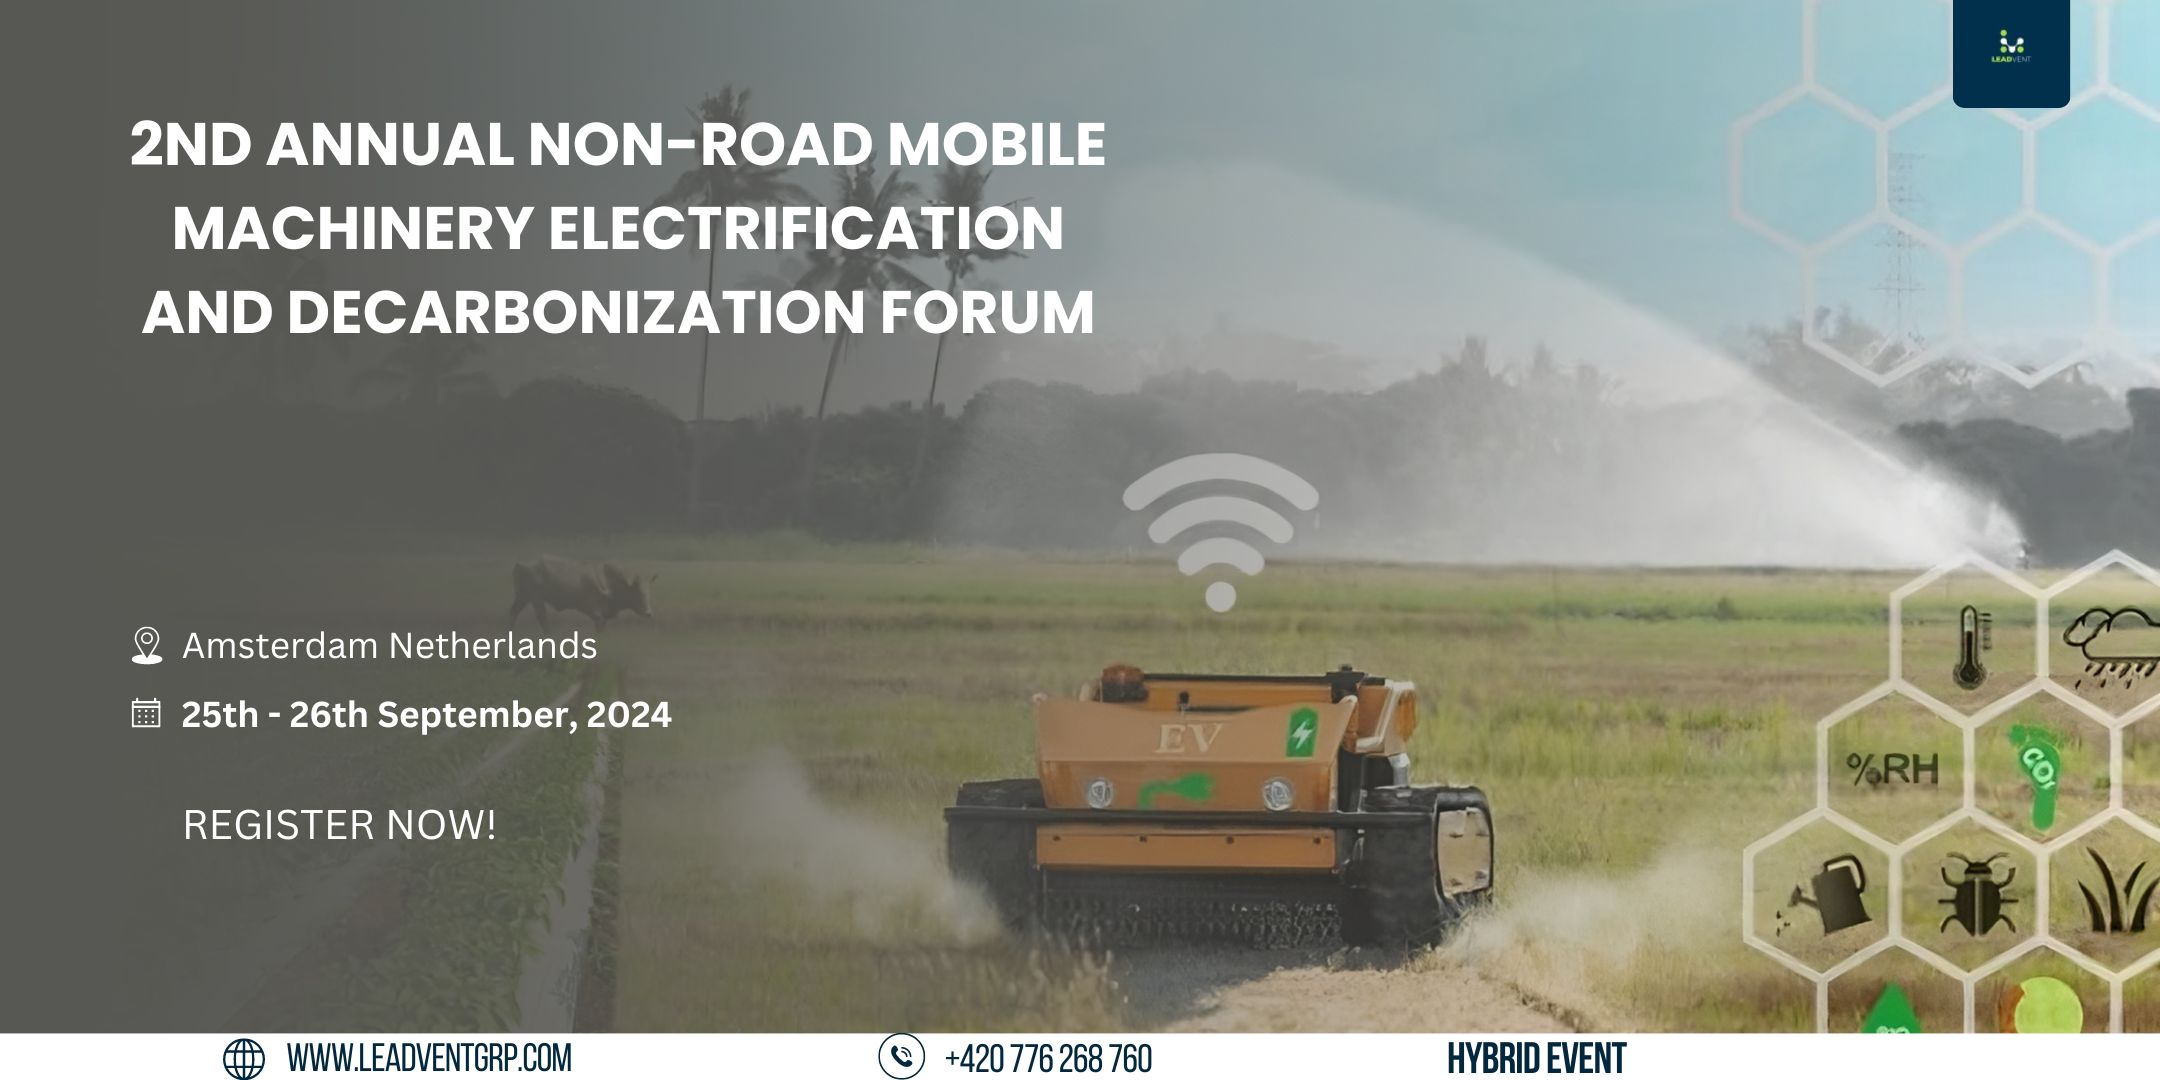 2nd Annual Non-Road Mobile Machinery Electrification And Decarbonization Forum organized by Leadvent Group